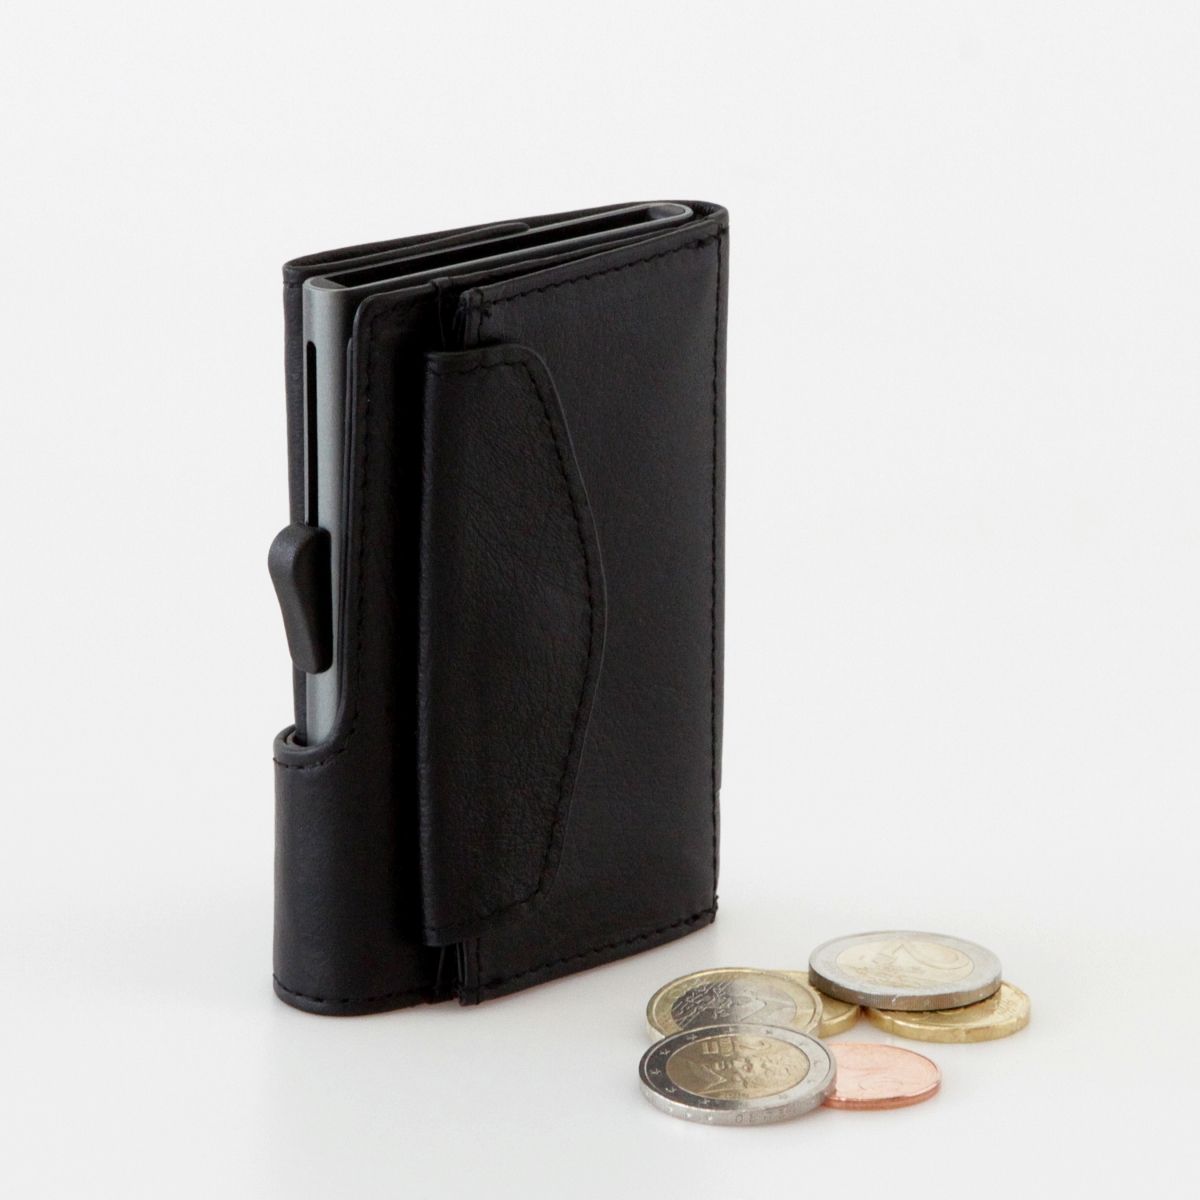 Aluminum Card Holder with PU Leather with Coin Pouch - Black